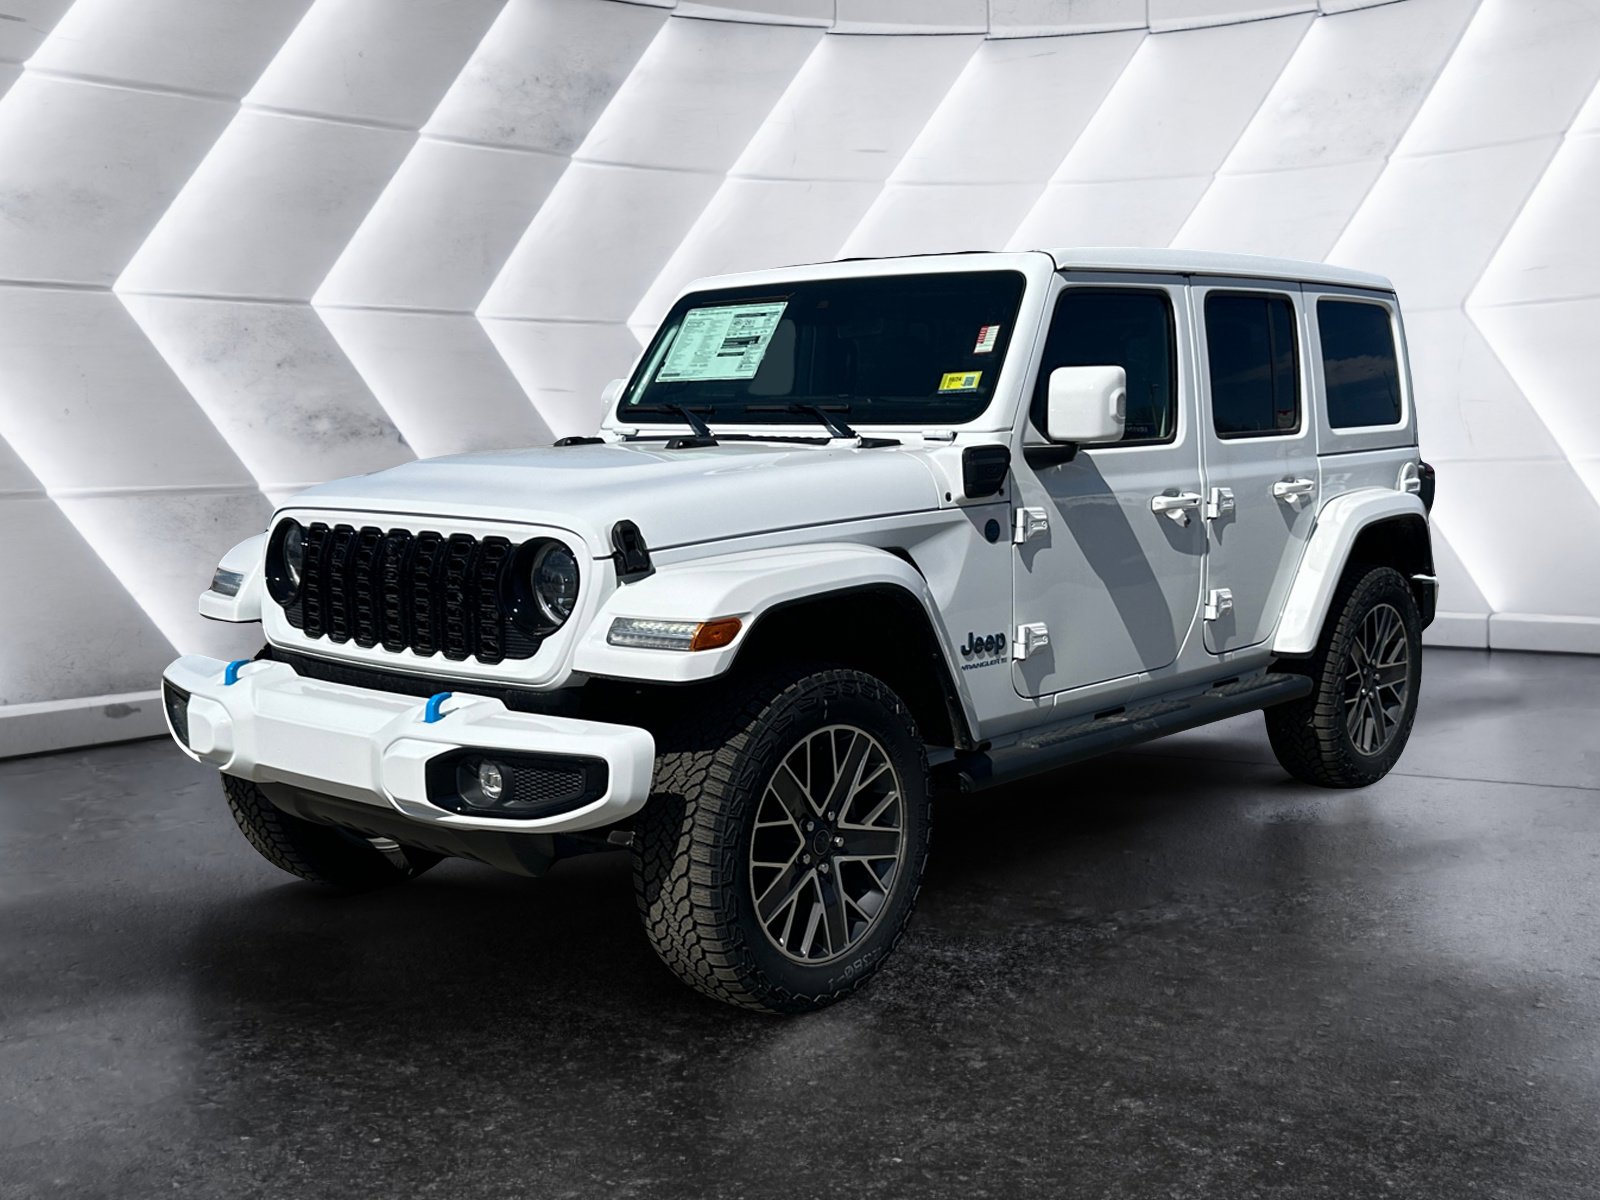 Autosaver Group - New Jeep Inventory | Autosaver Group